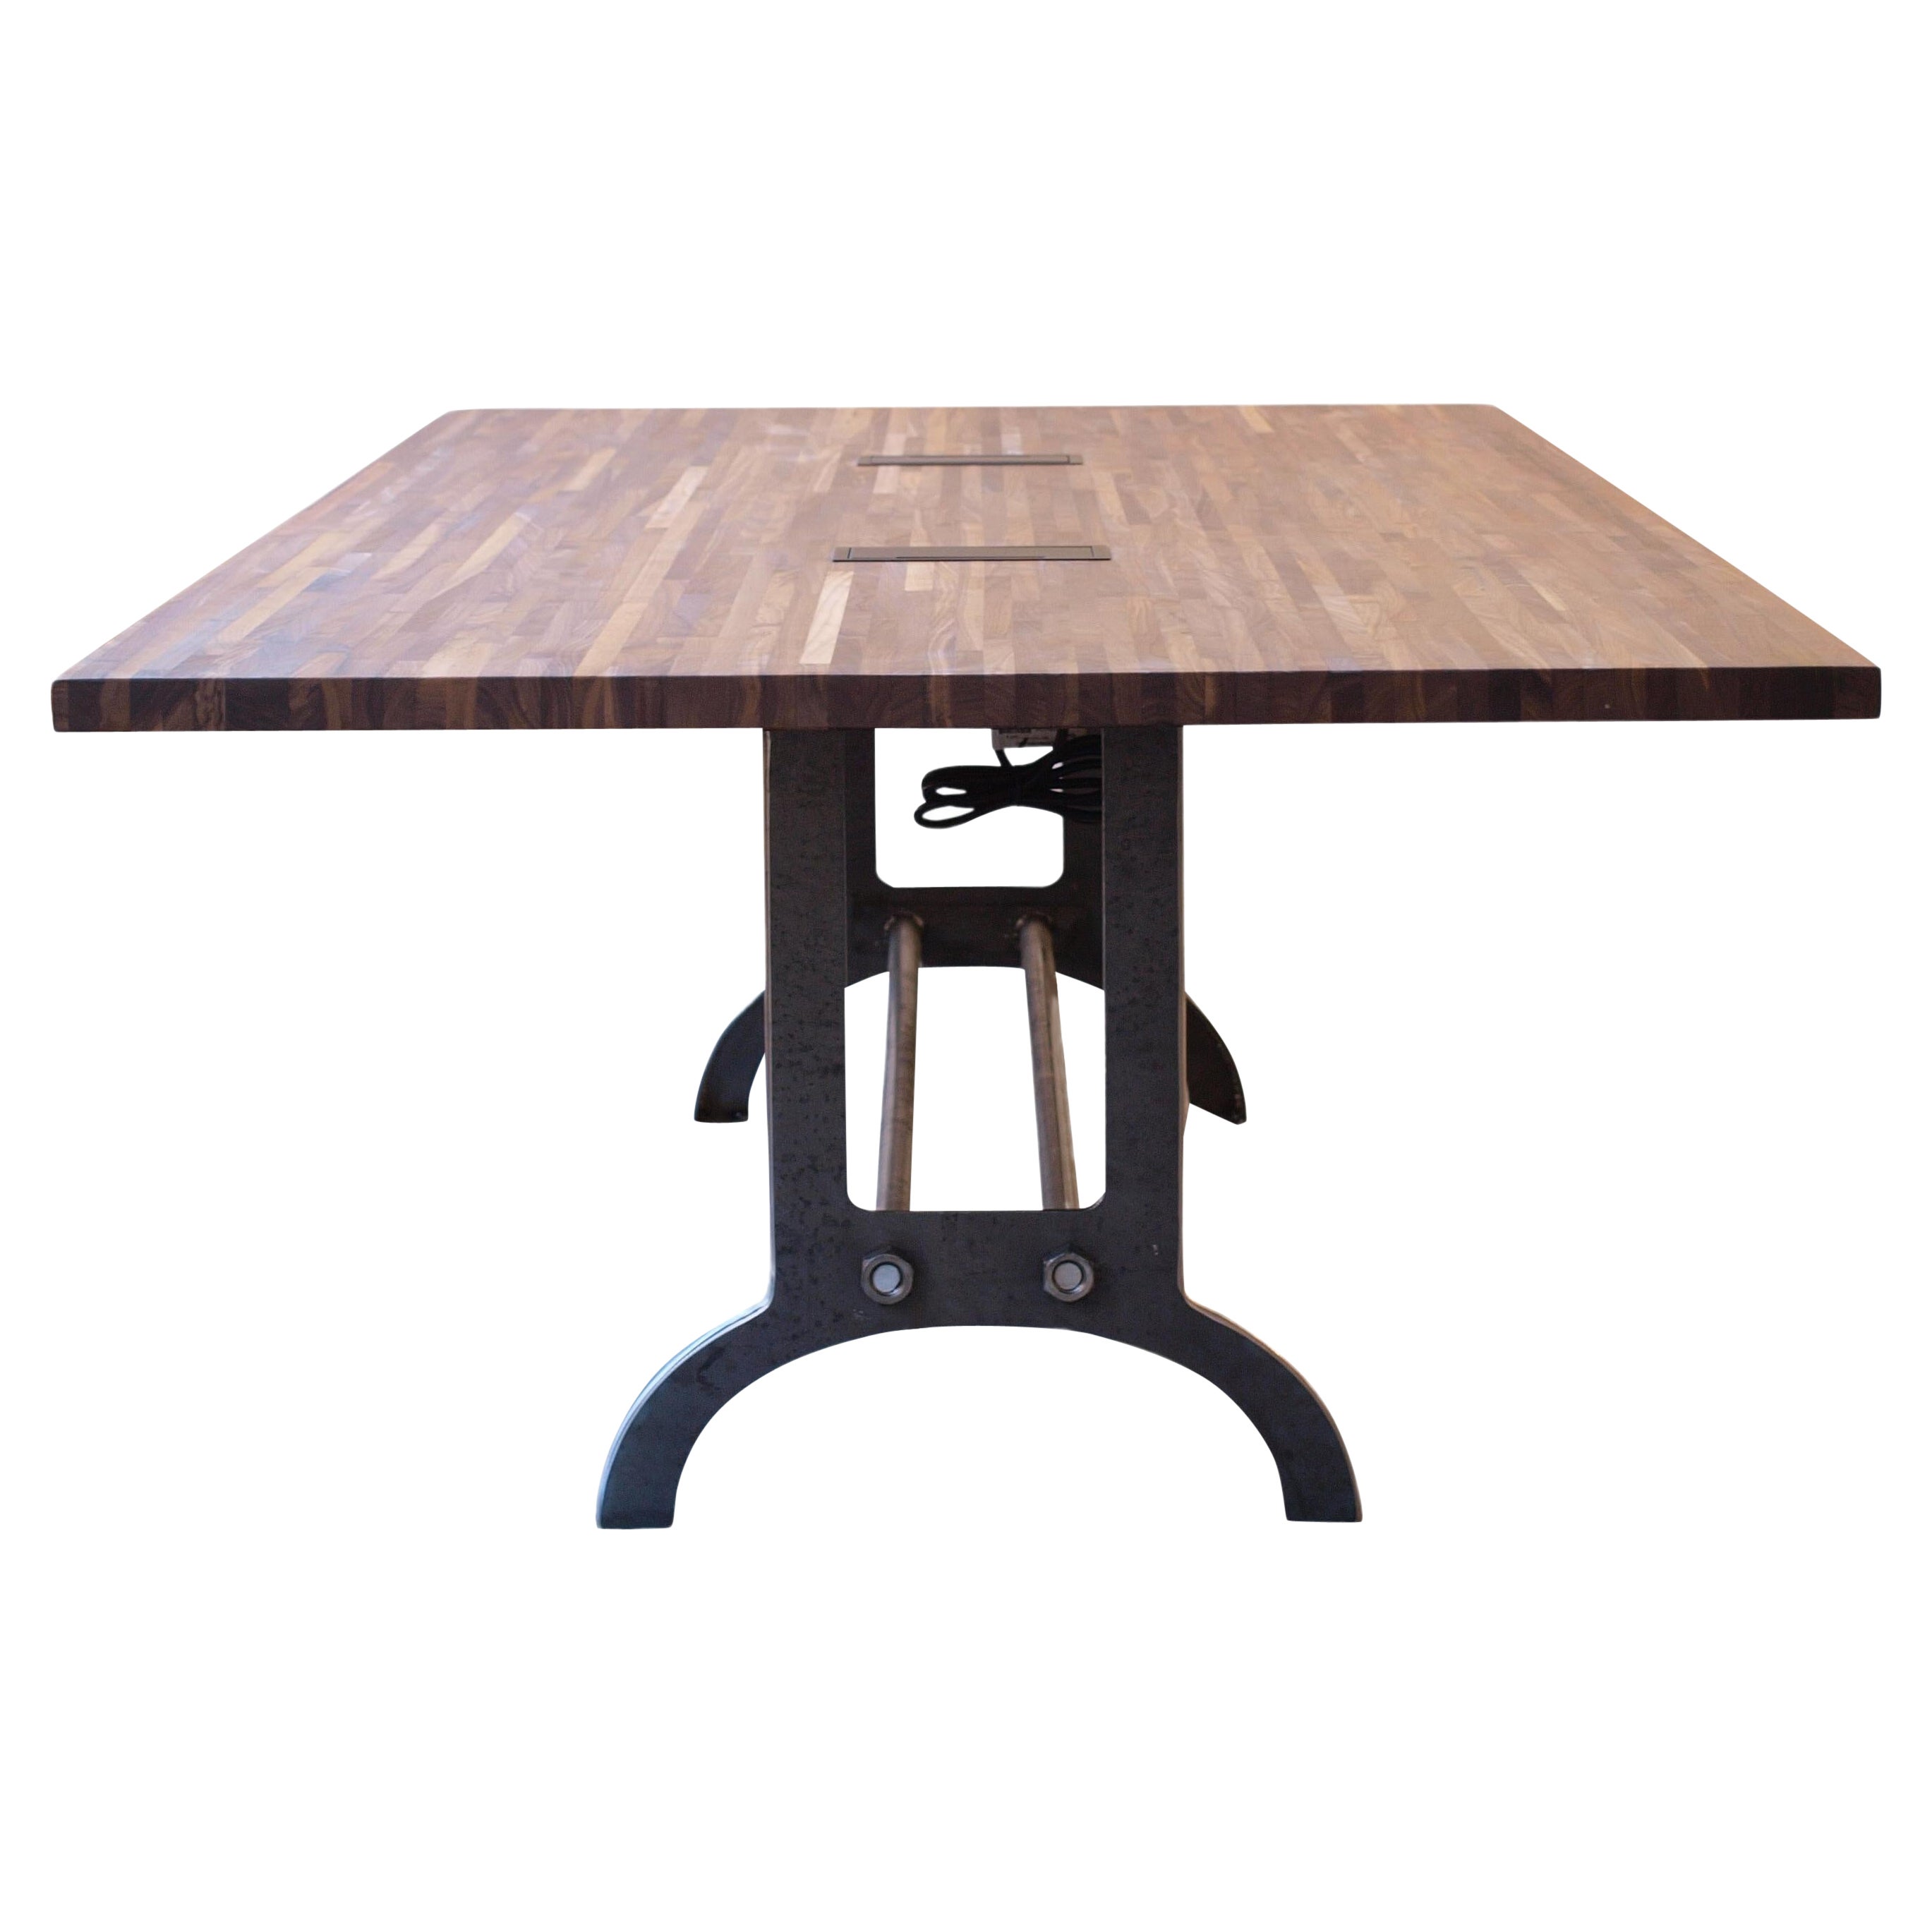 10 foot Industrial Beech Wood conference table For Sale